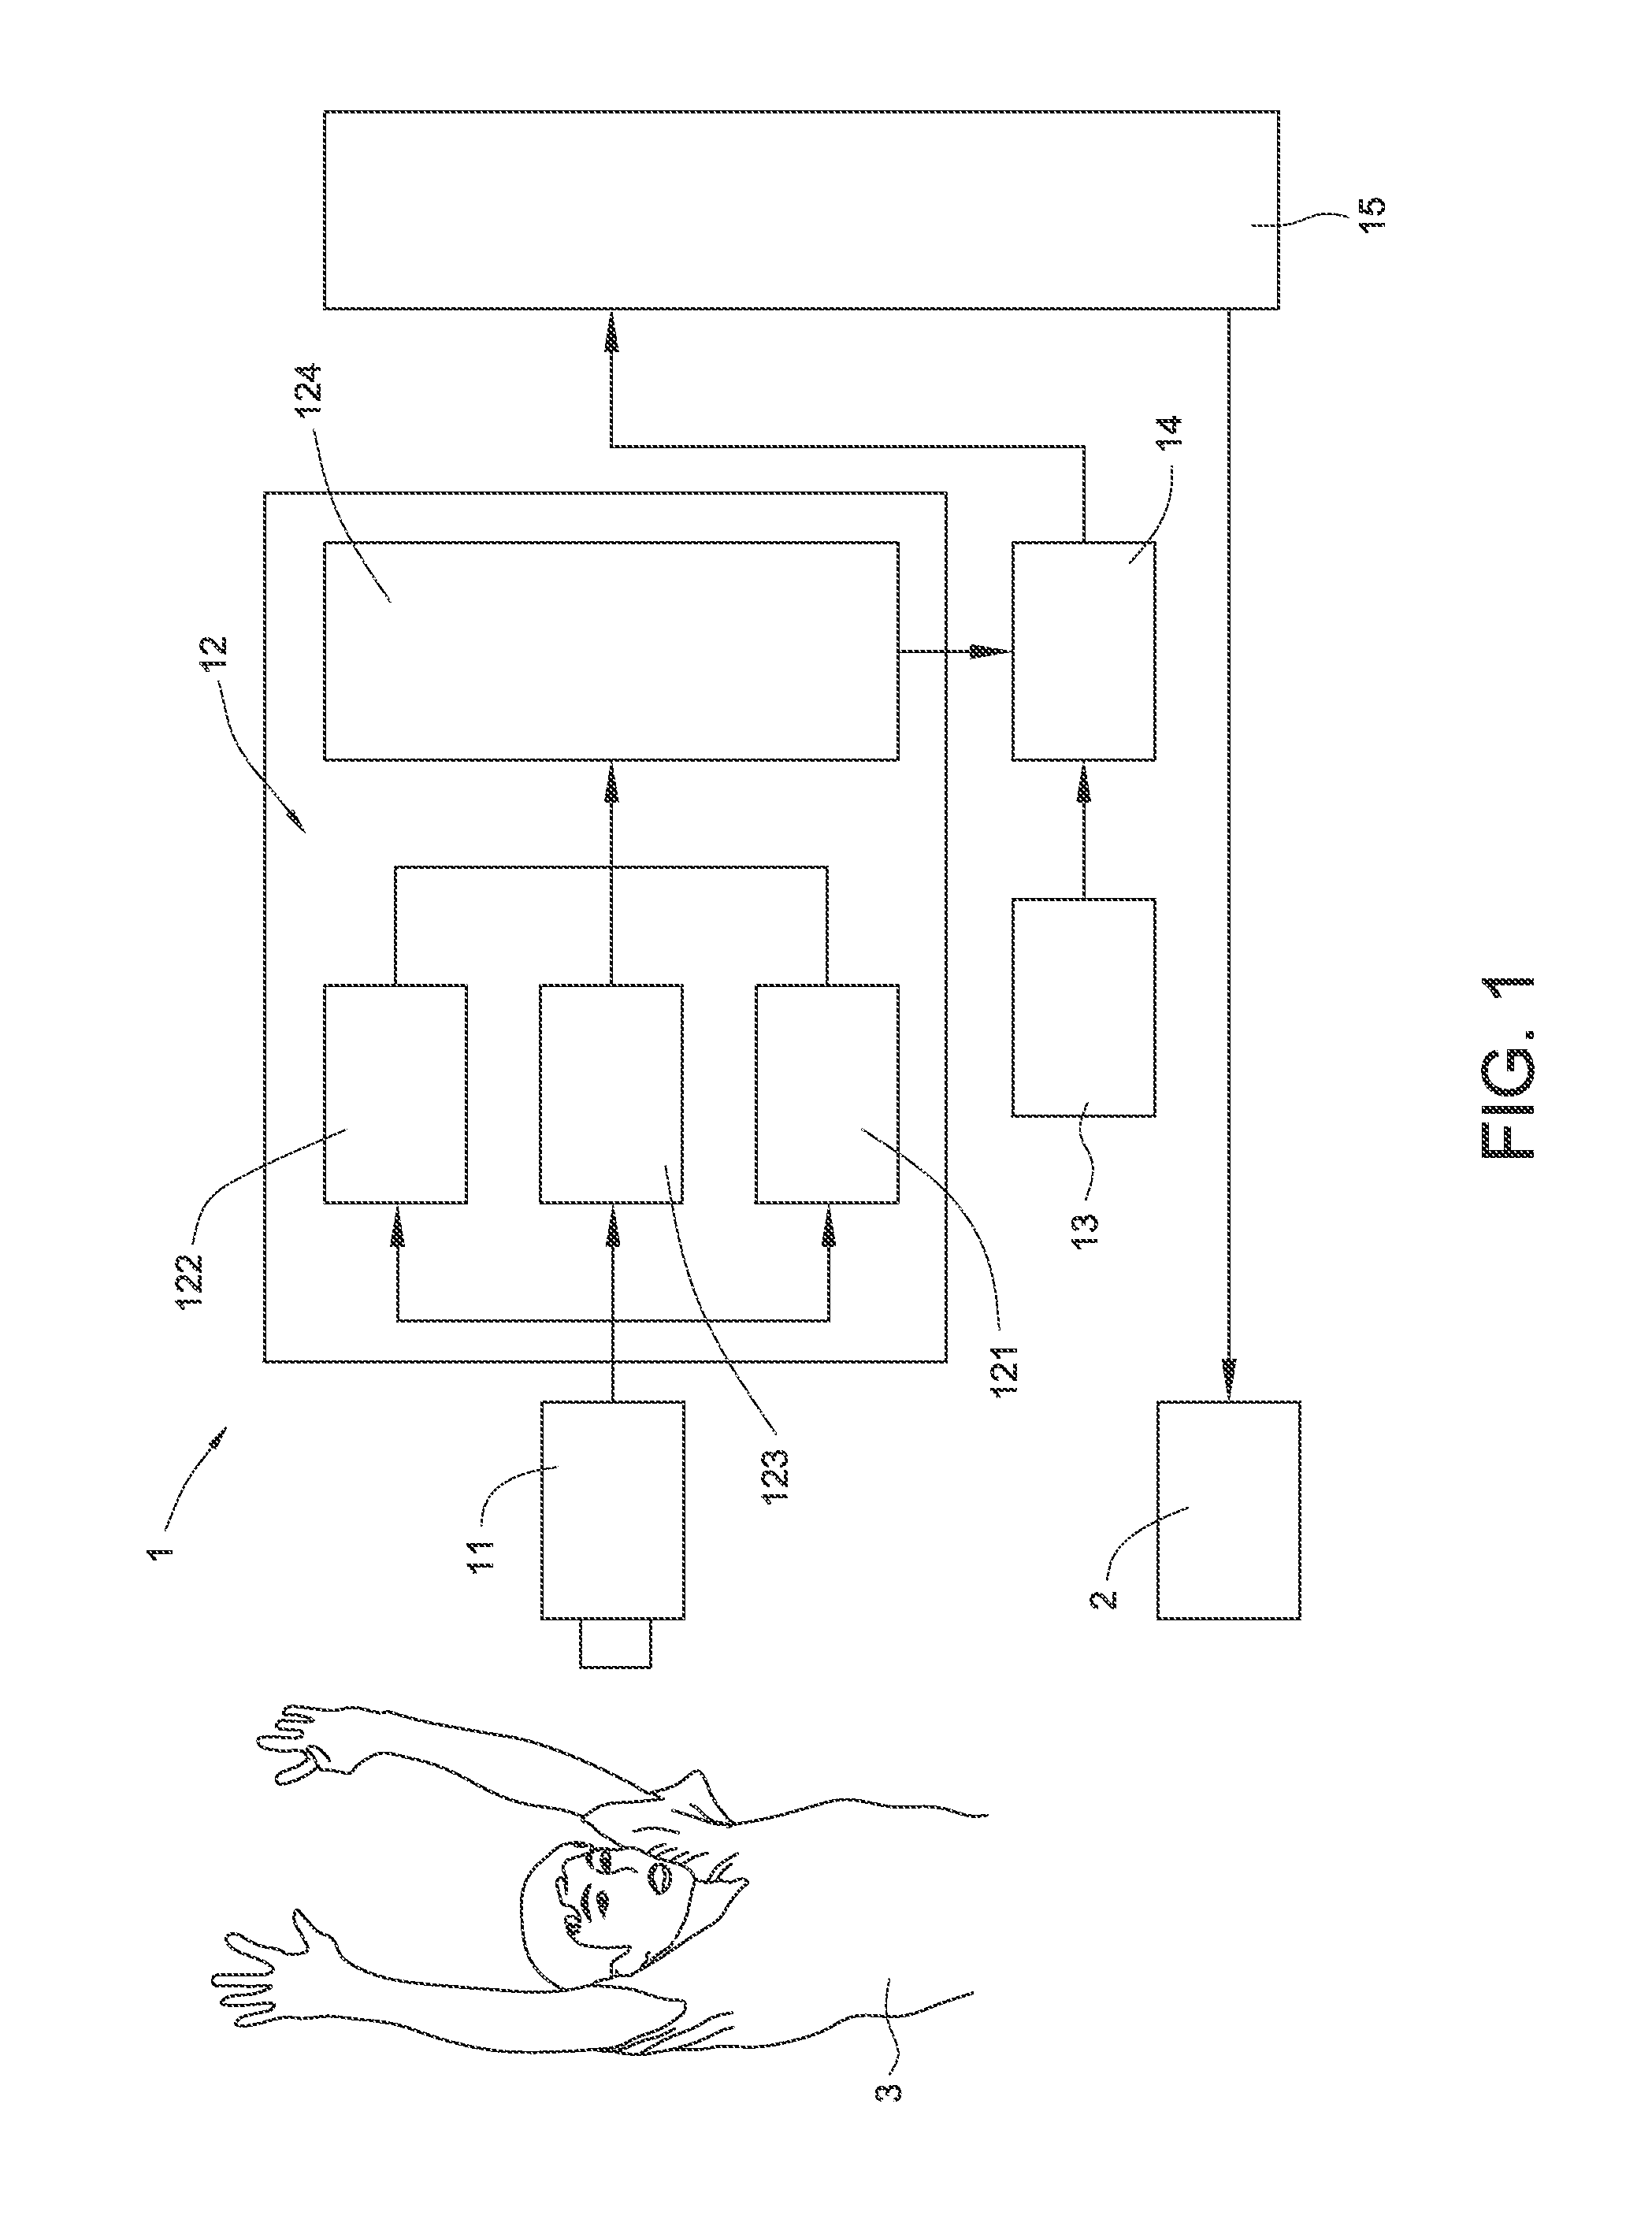 System and method for generating control instruction by using image pickup device to recognize users posture